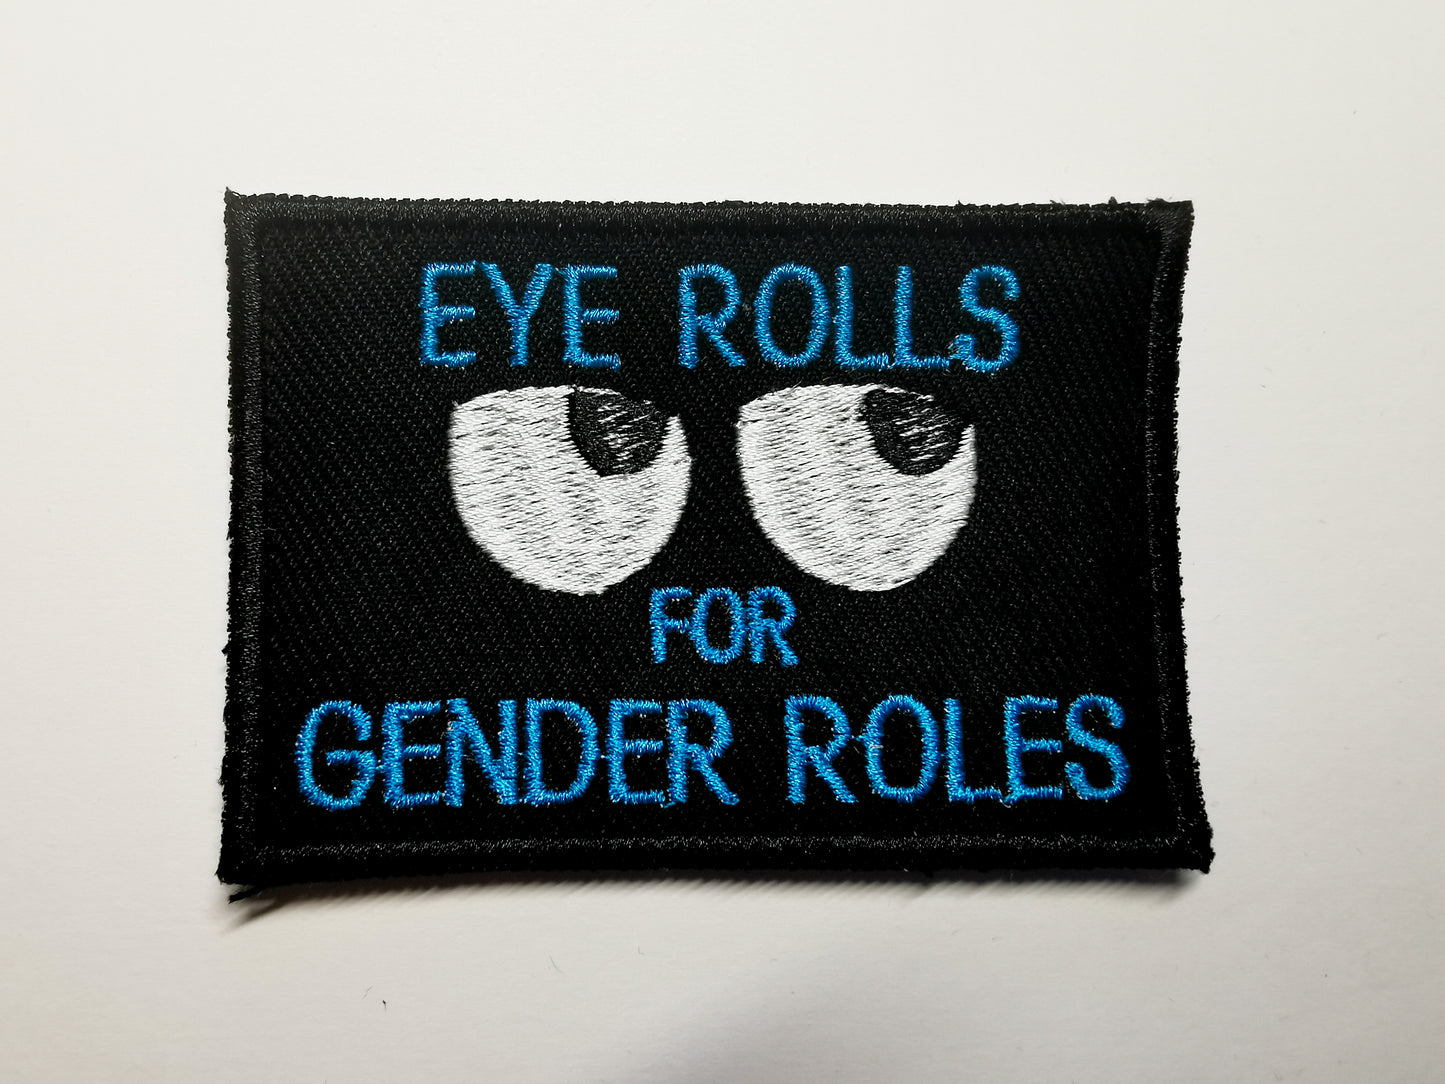 Eye Rolls for Gender Roles Embroidered Patch Square Aqua Blue